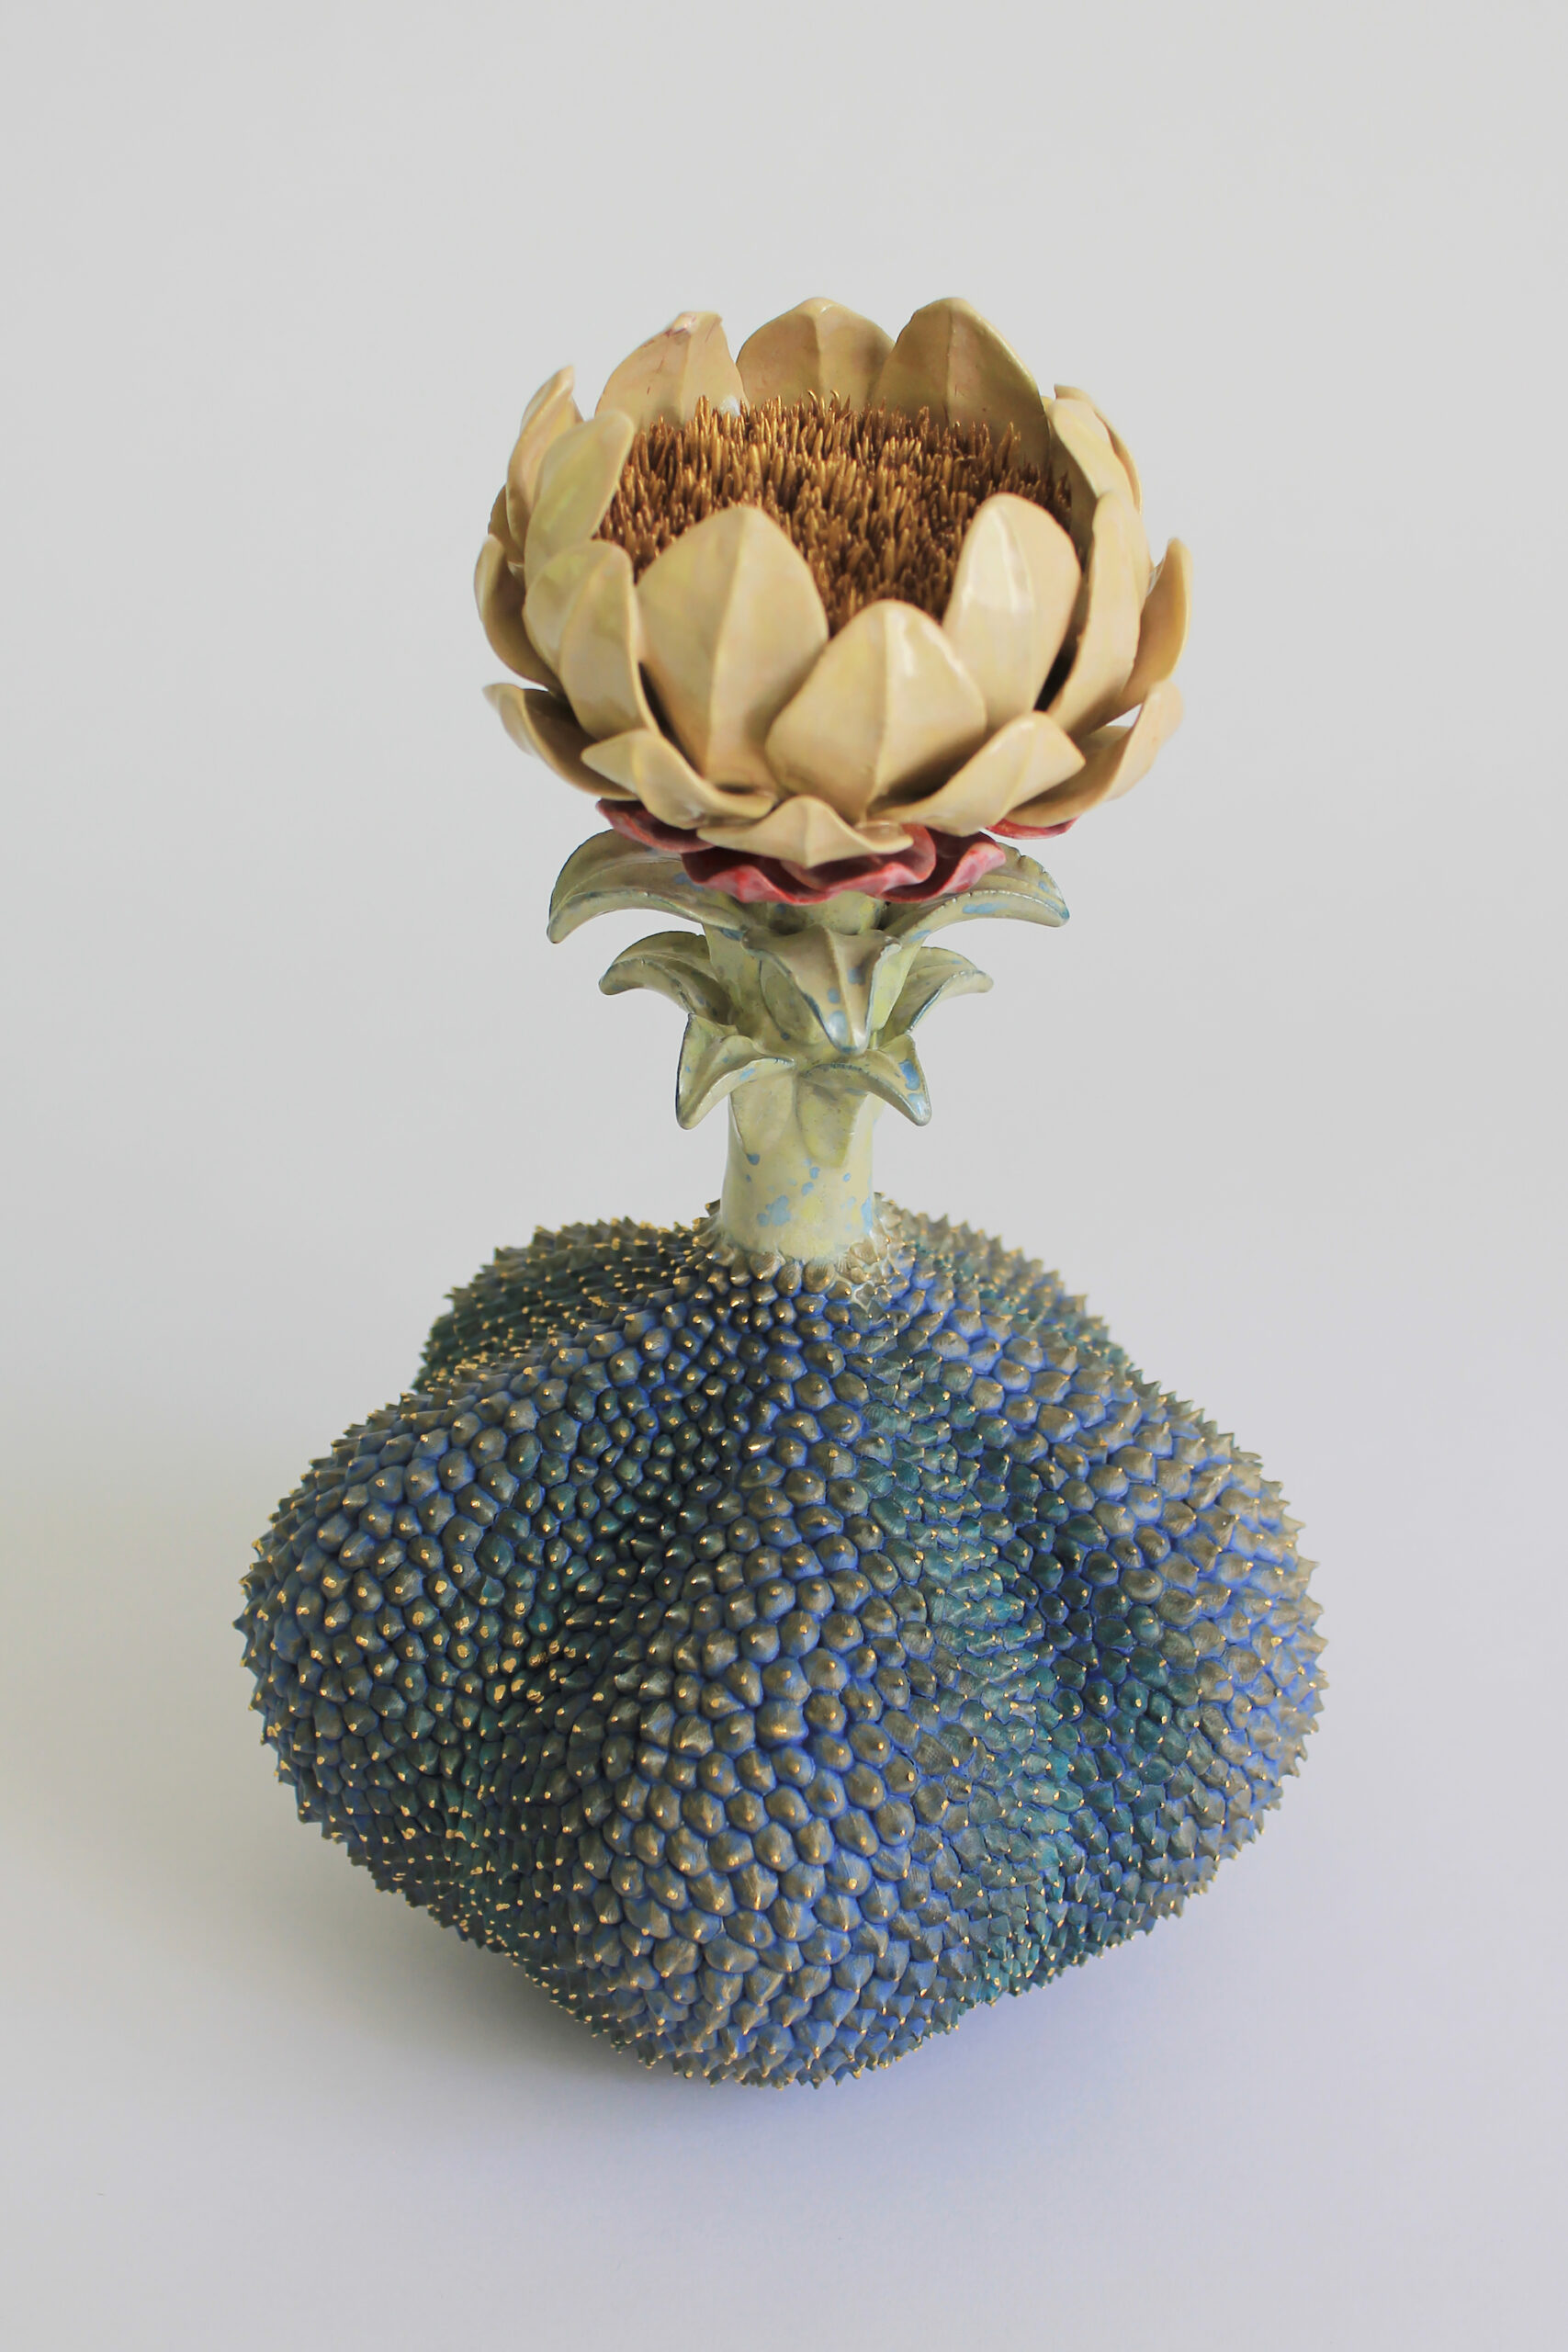 An abstract sculpture of an imaginary plant made from ceramic with a large yellow flower on top.